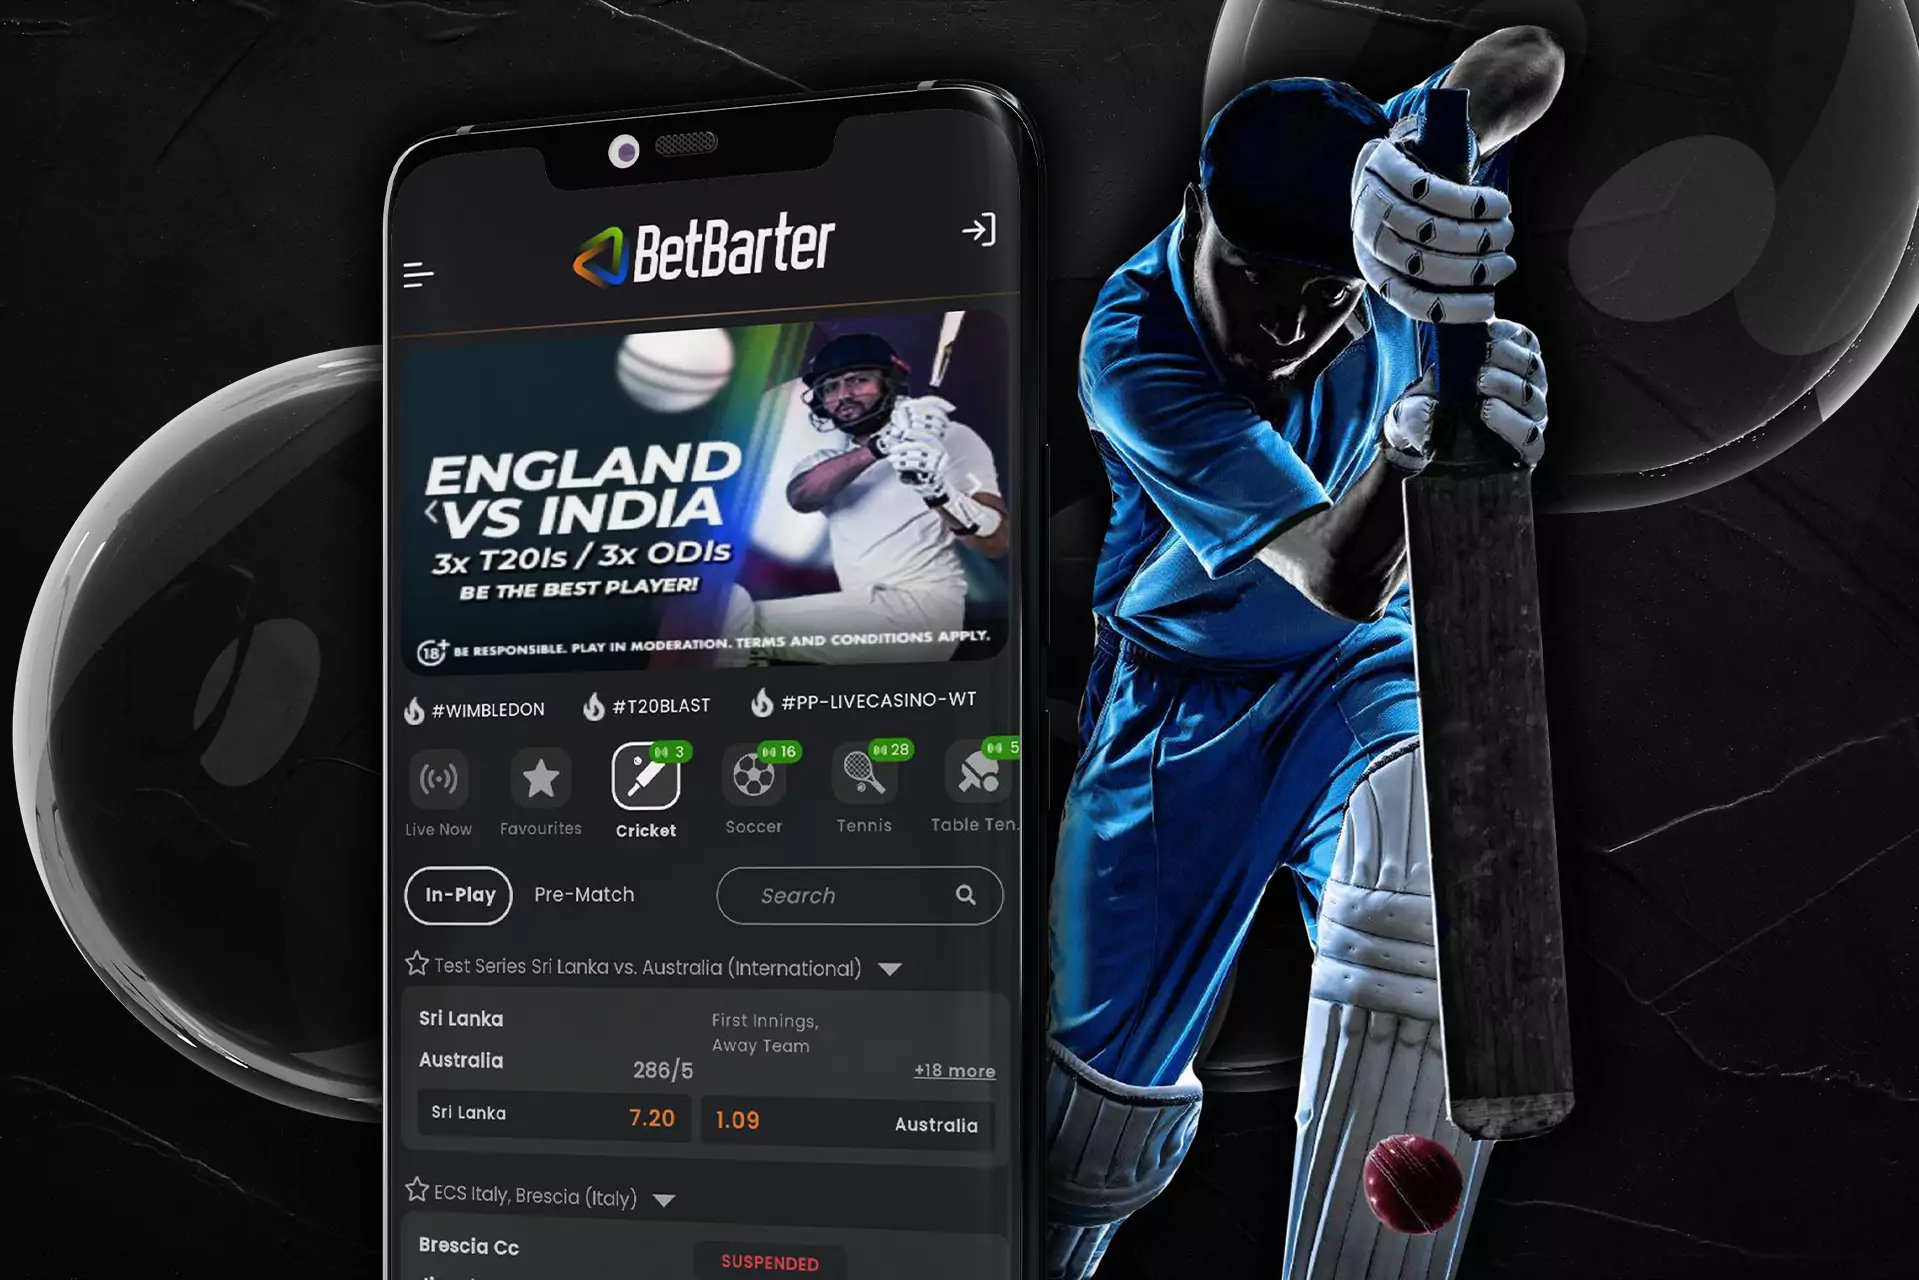 Cricket betting avialable in the Betbarter app.